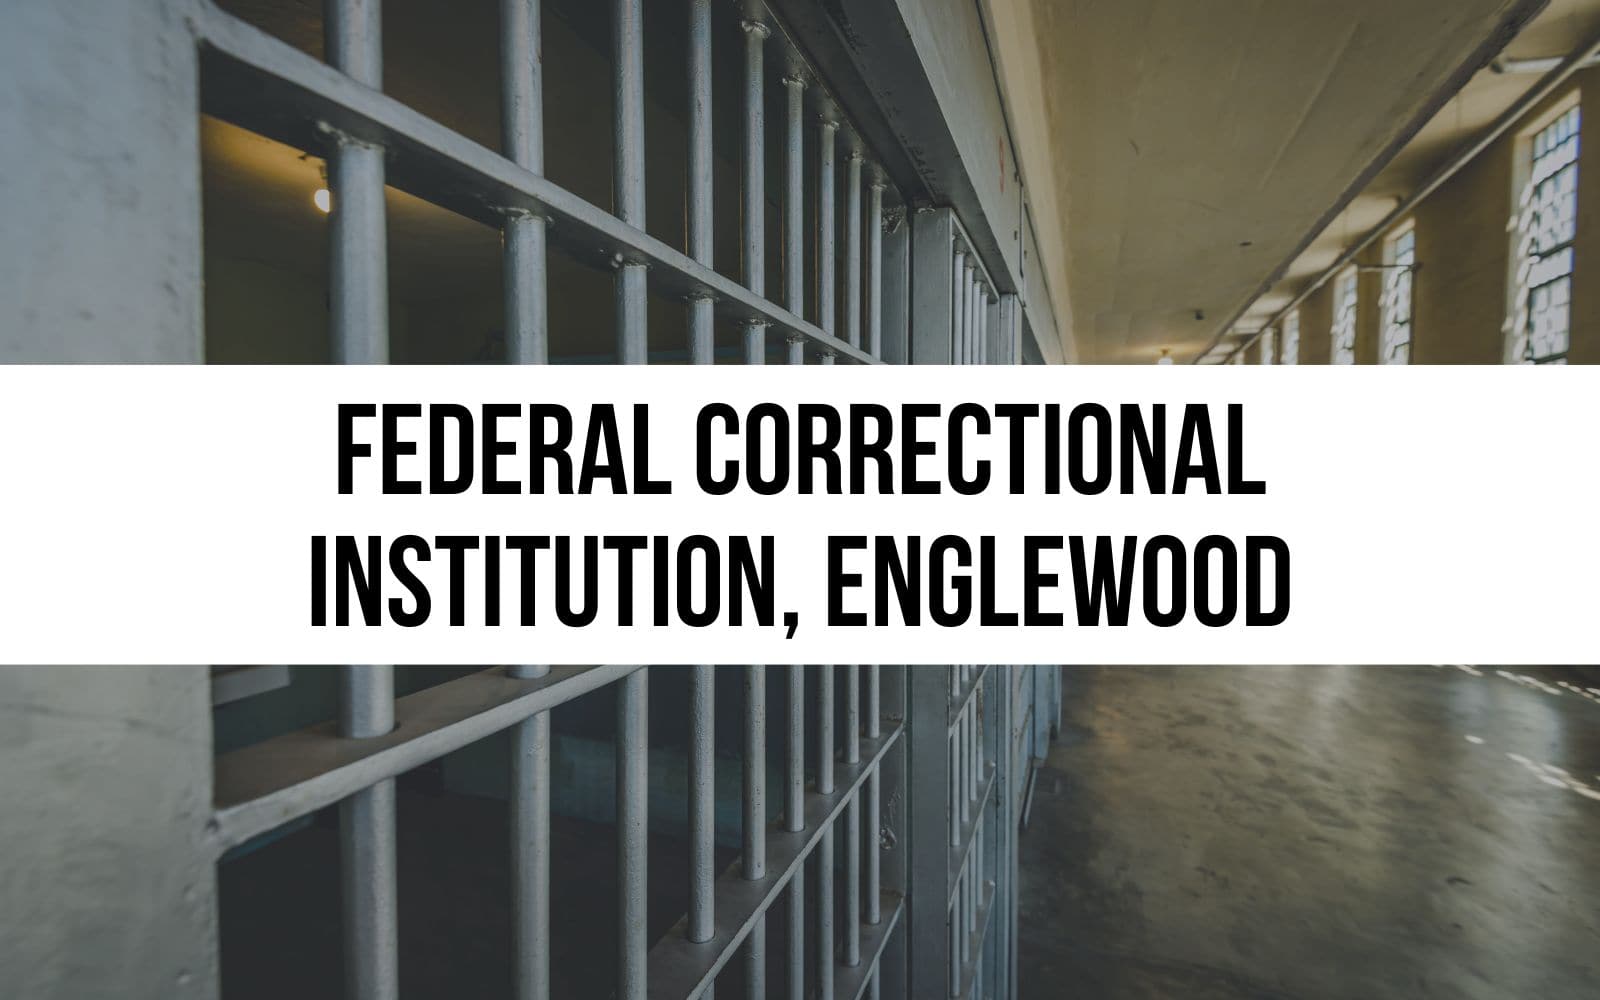 Federal Correctional Institution, Englewood